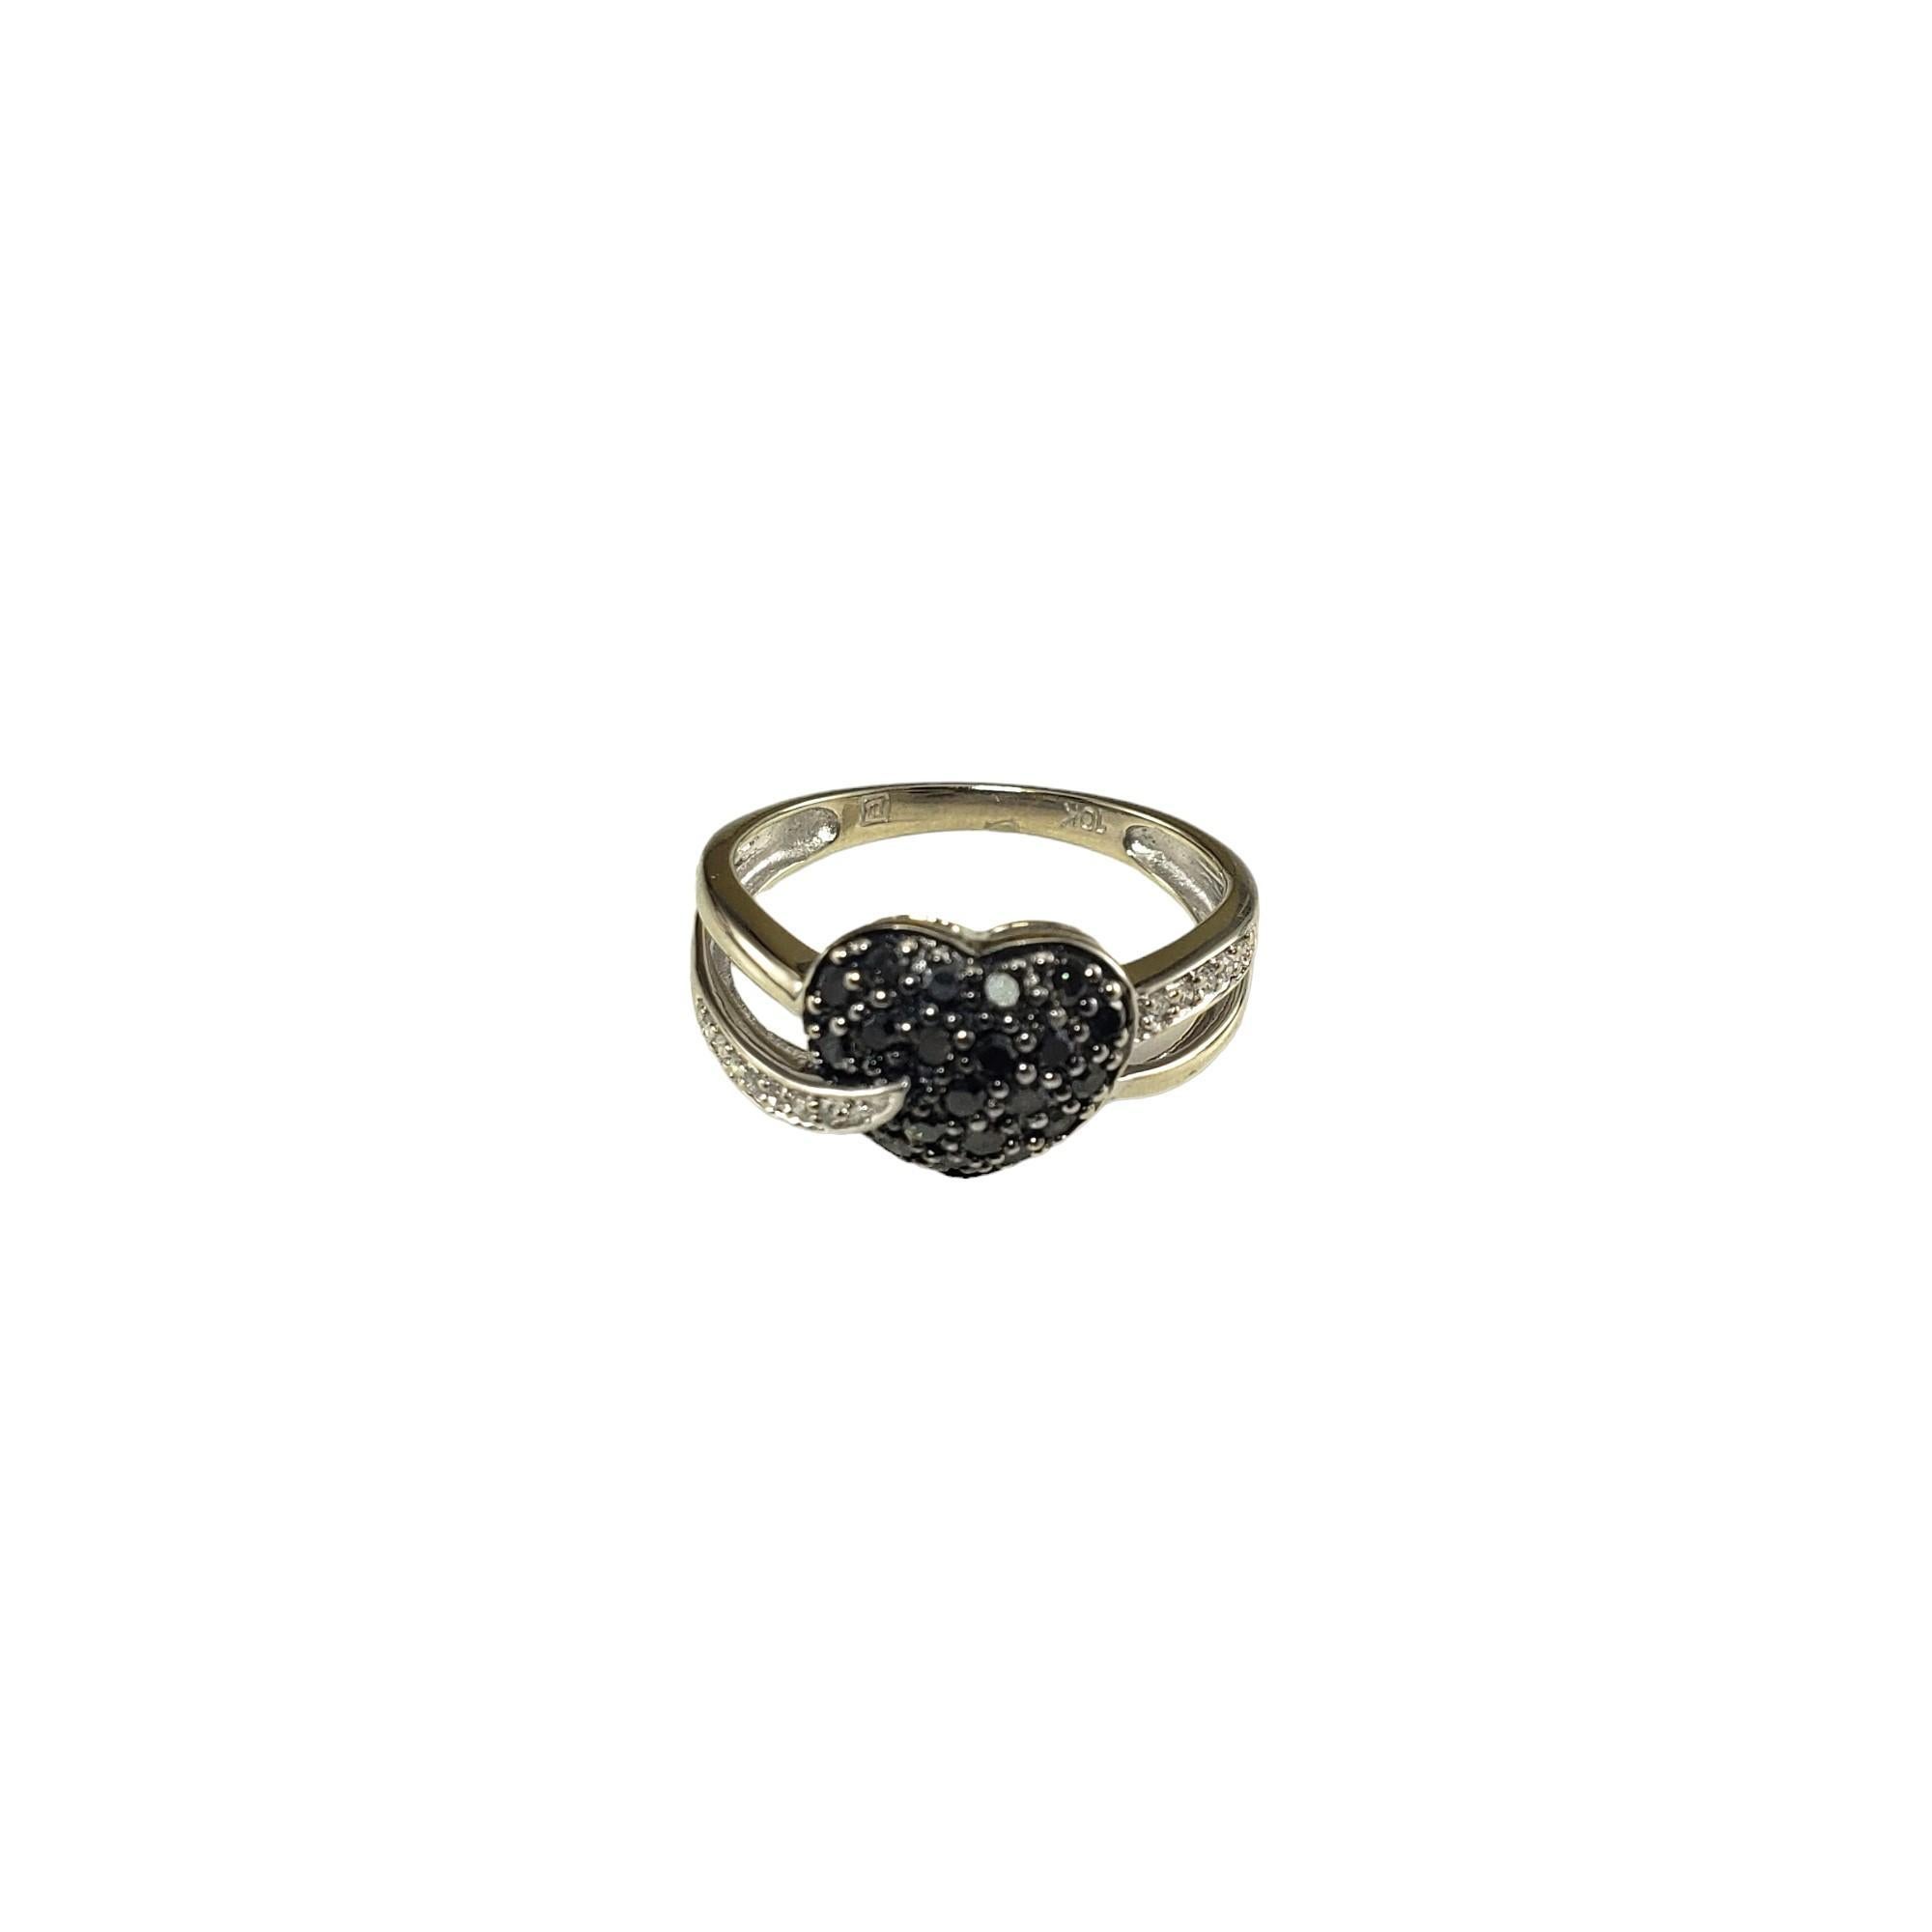 Vintage 10K White Gold Black Stone and White Diamond Heart Ring Size 6.25-

This lovely heart ring features 20 black stones and 12 round single cut white diamonds set in beautifully detailed 10K white gold. Width: 10 mm.  Shank: 2 mm.

Approximate